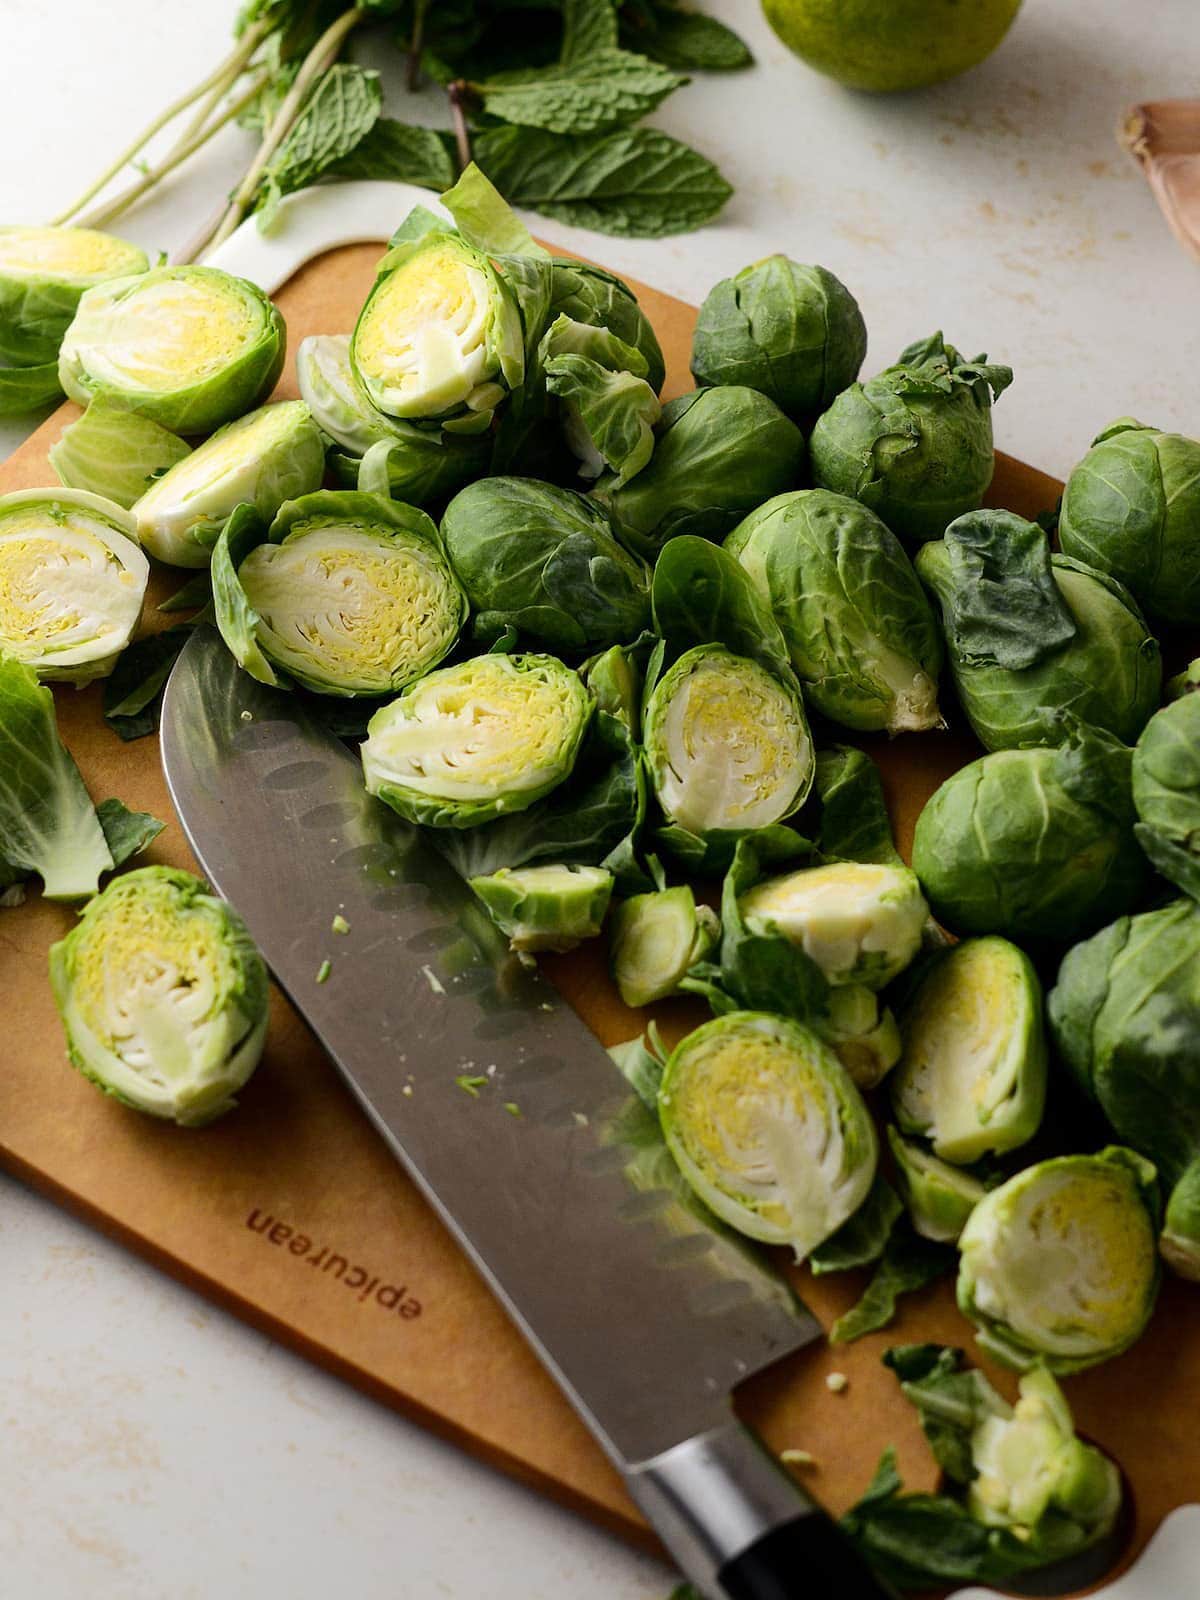 This is a photo of partially halved brussel sprouts.